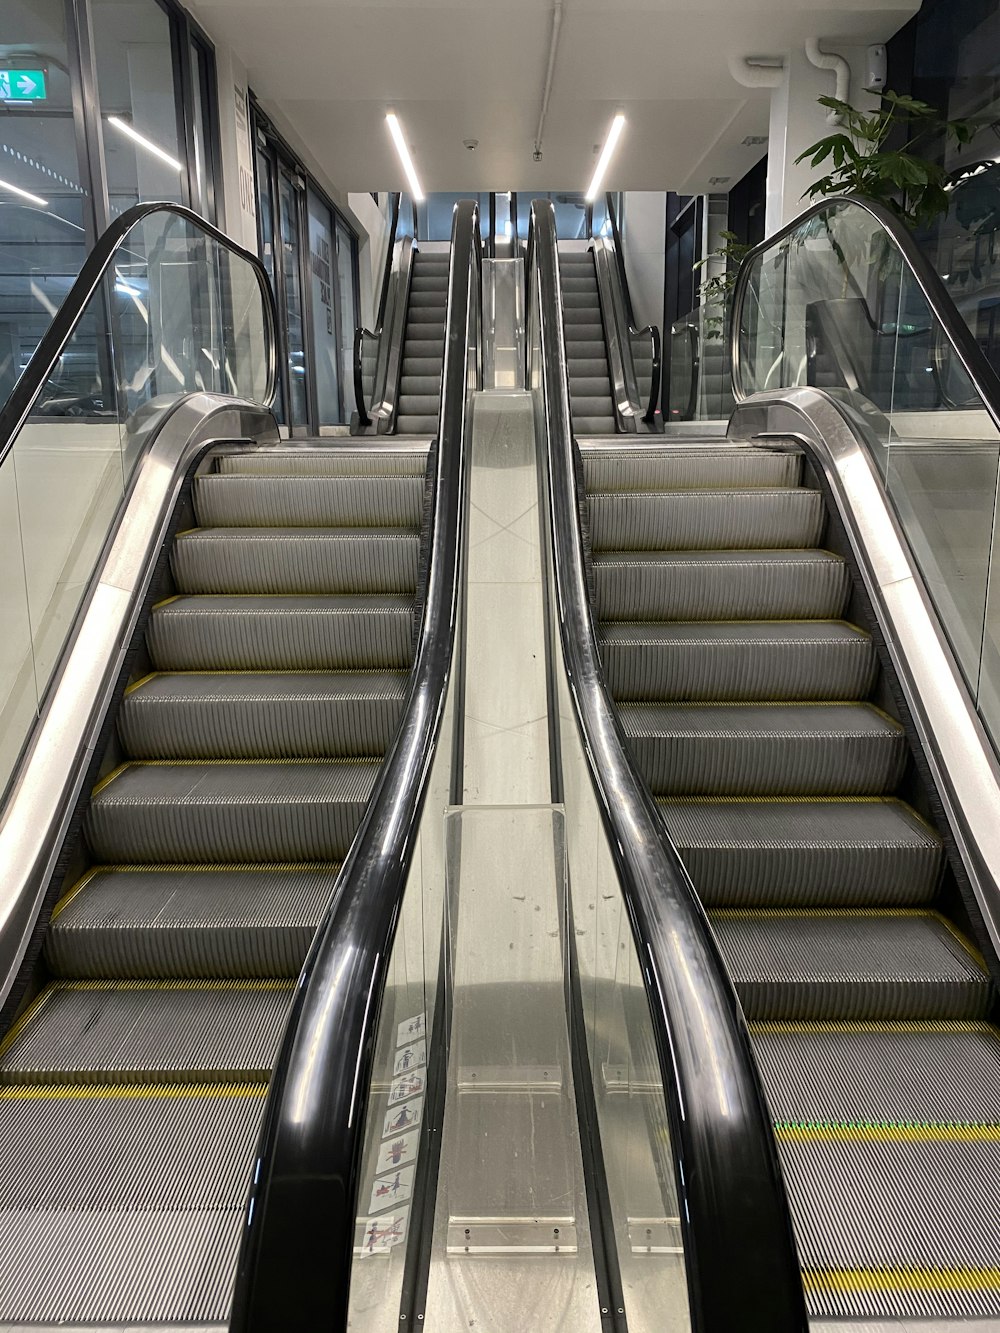 stainless steel escalator with no people